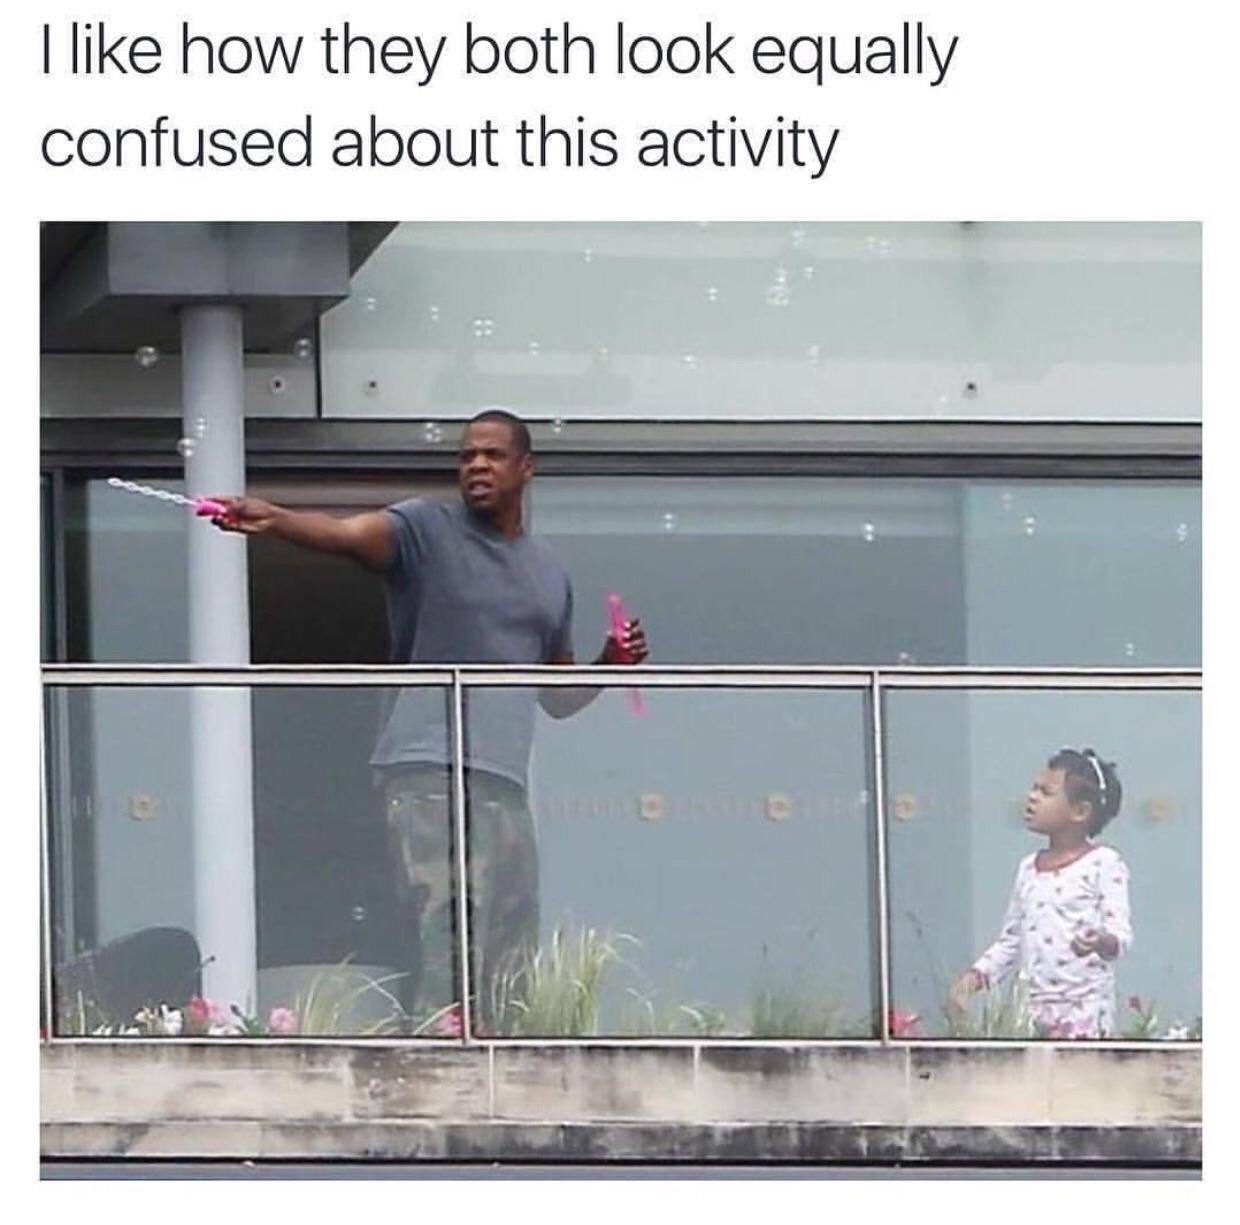 dank meme - jay z confused meme - I how they both look equally confused about this activity